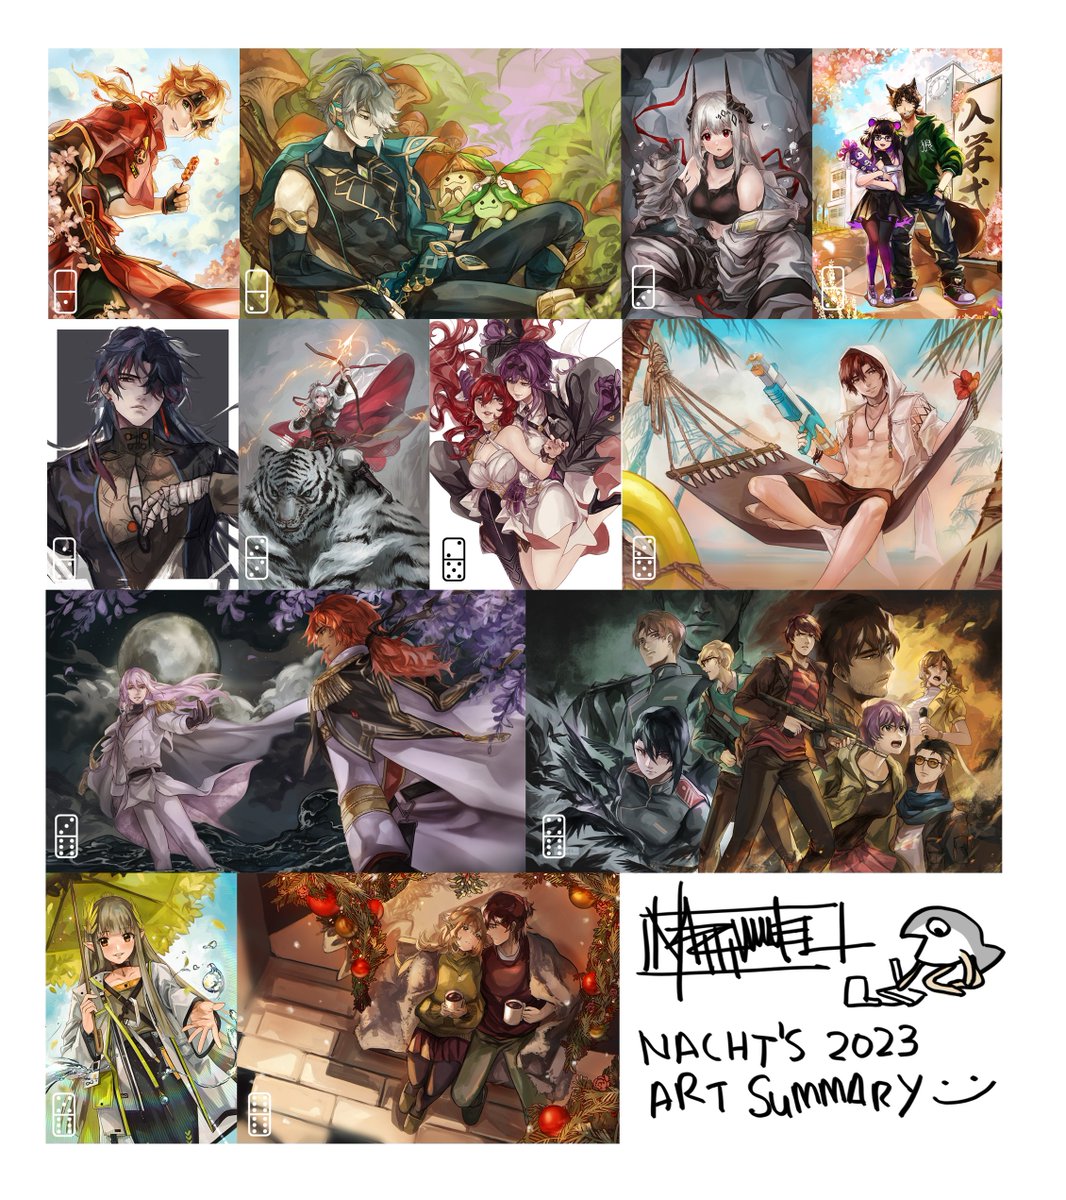 a year with a great balance of fanarts of series i love dearly, commissions for some amazing clients, and of course my kids ✨✨ 